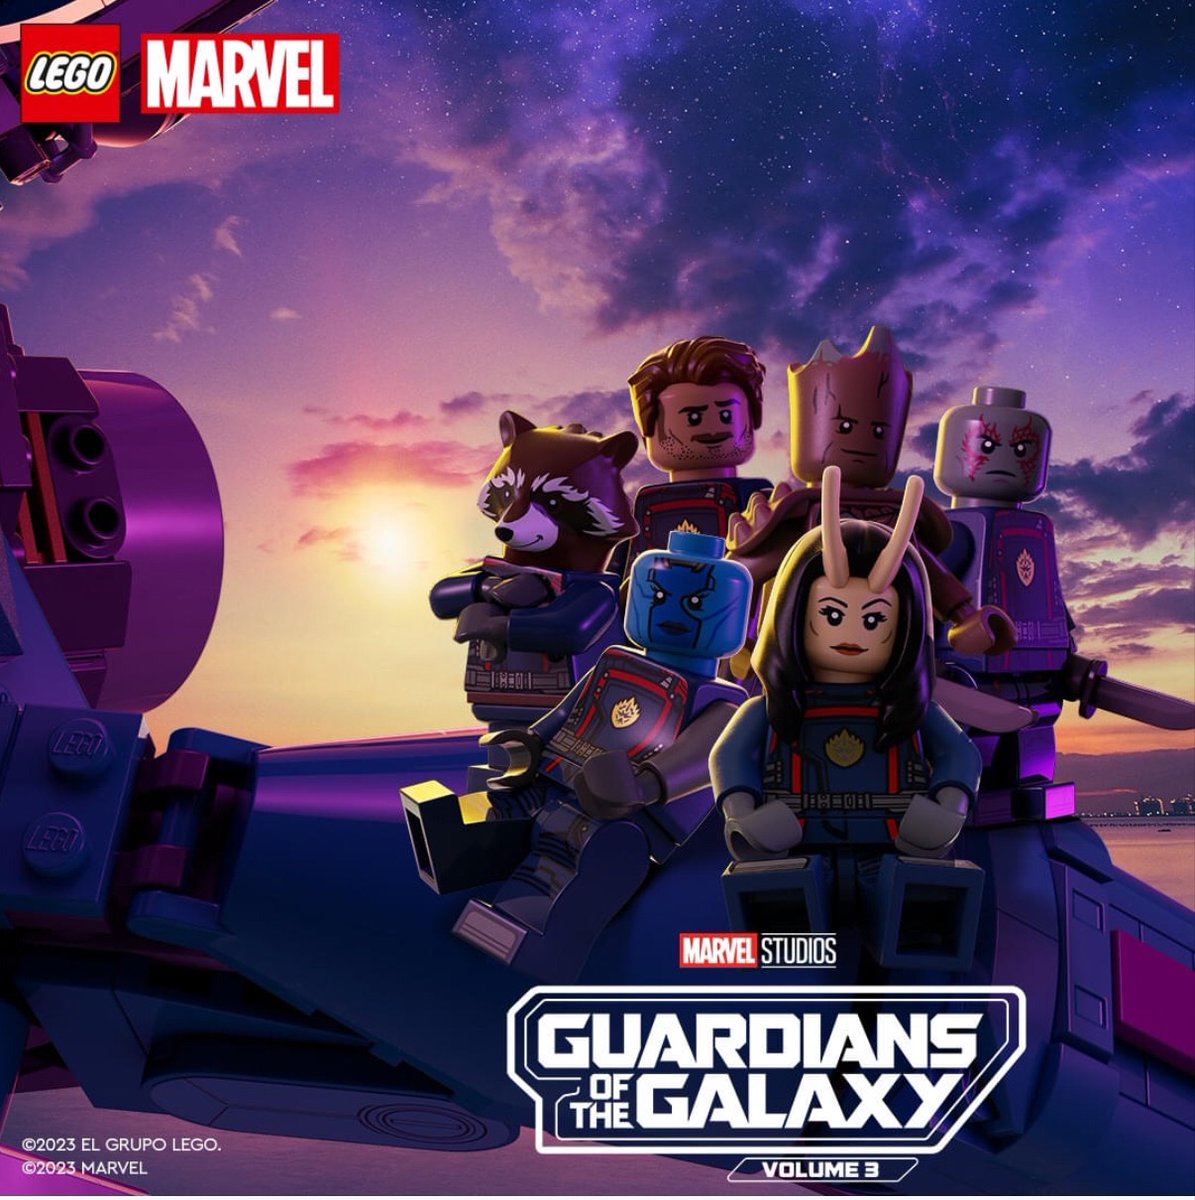 Profit Barber tema MCU - CoveredGeekly on Twitter: "A new LEGO poster for  #GuardiansOfTheGalaxyVol3 has been released. https://t.co/9mdrv3Teug" /  Twitter